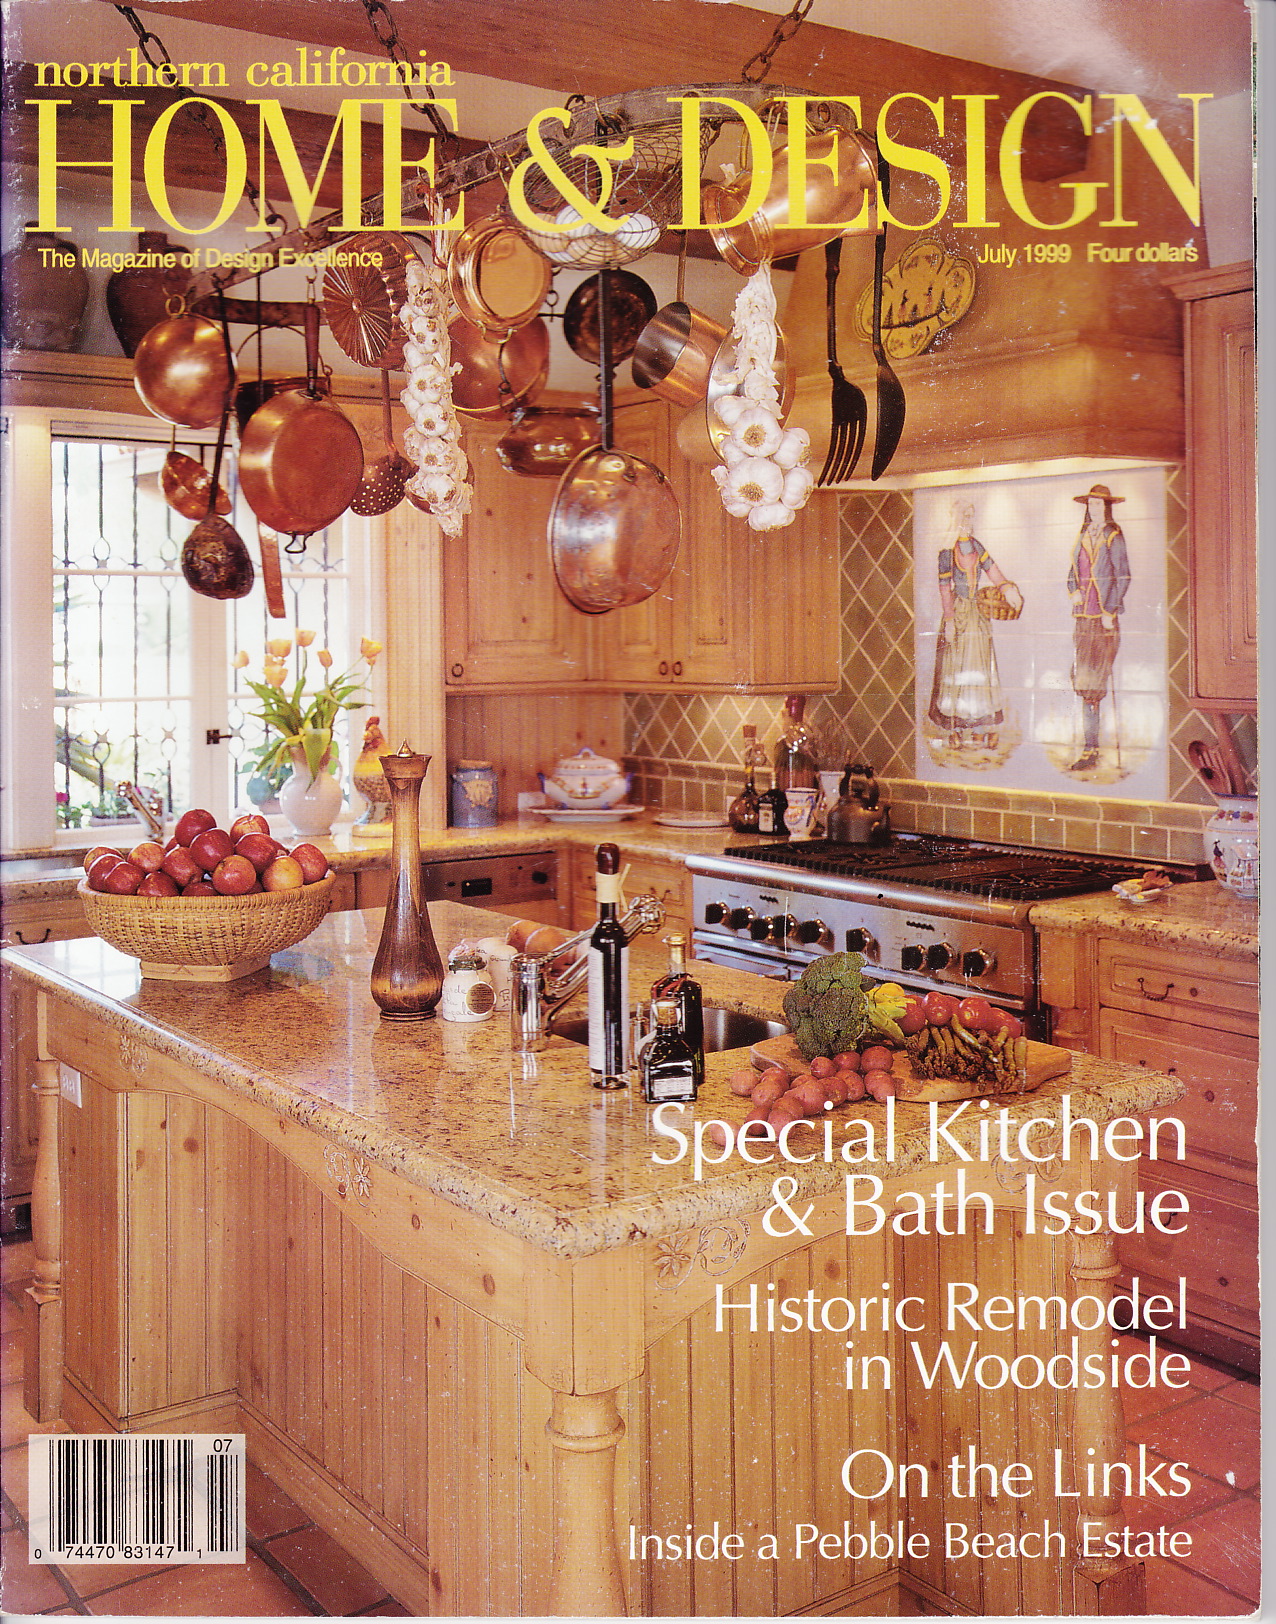 Nor Cal Home and Design July 1999.jpg